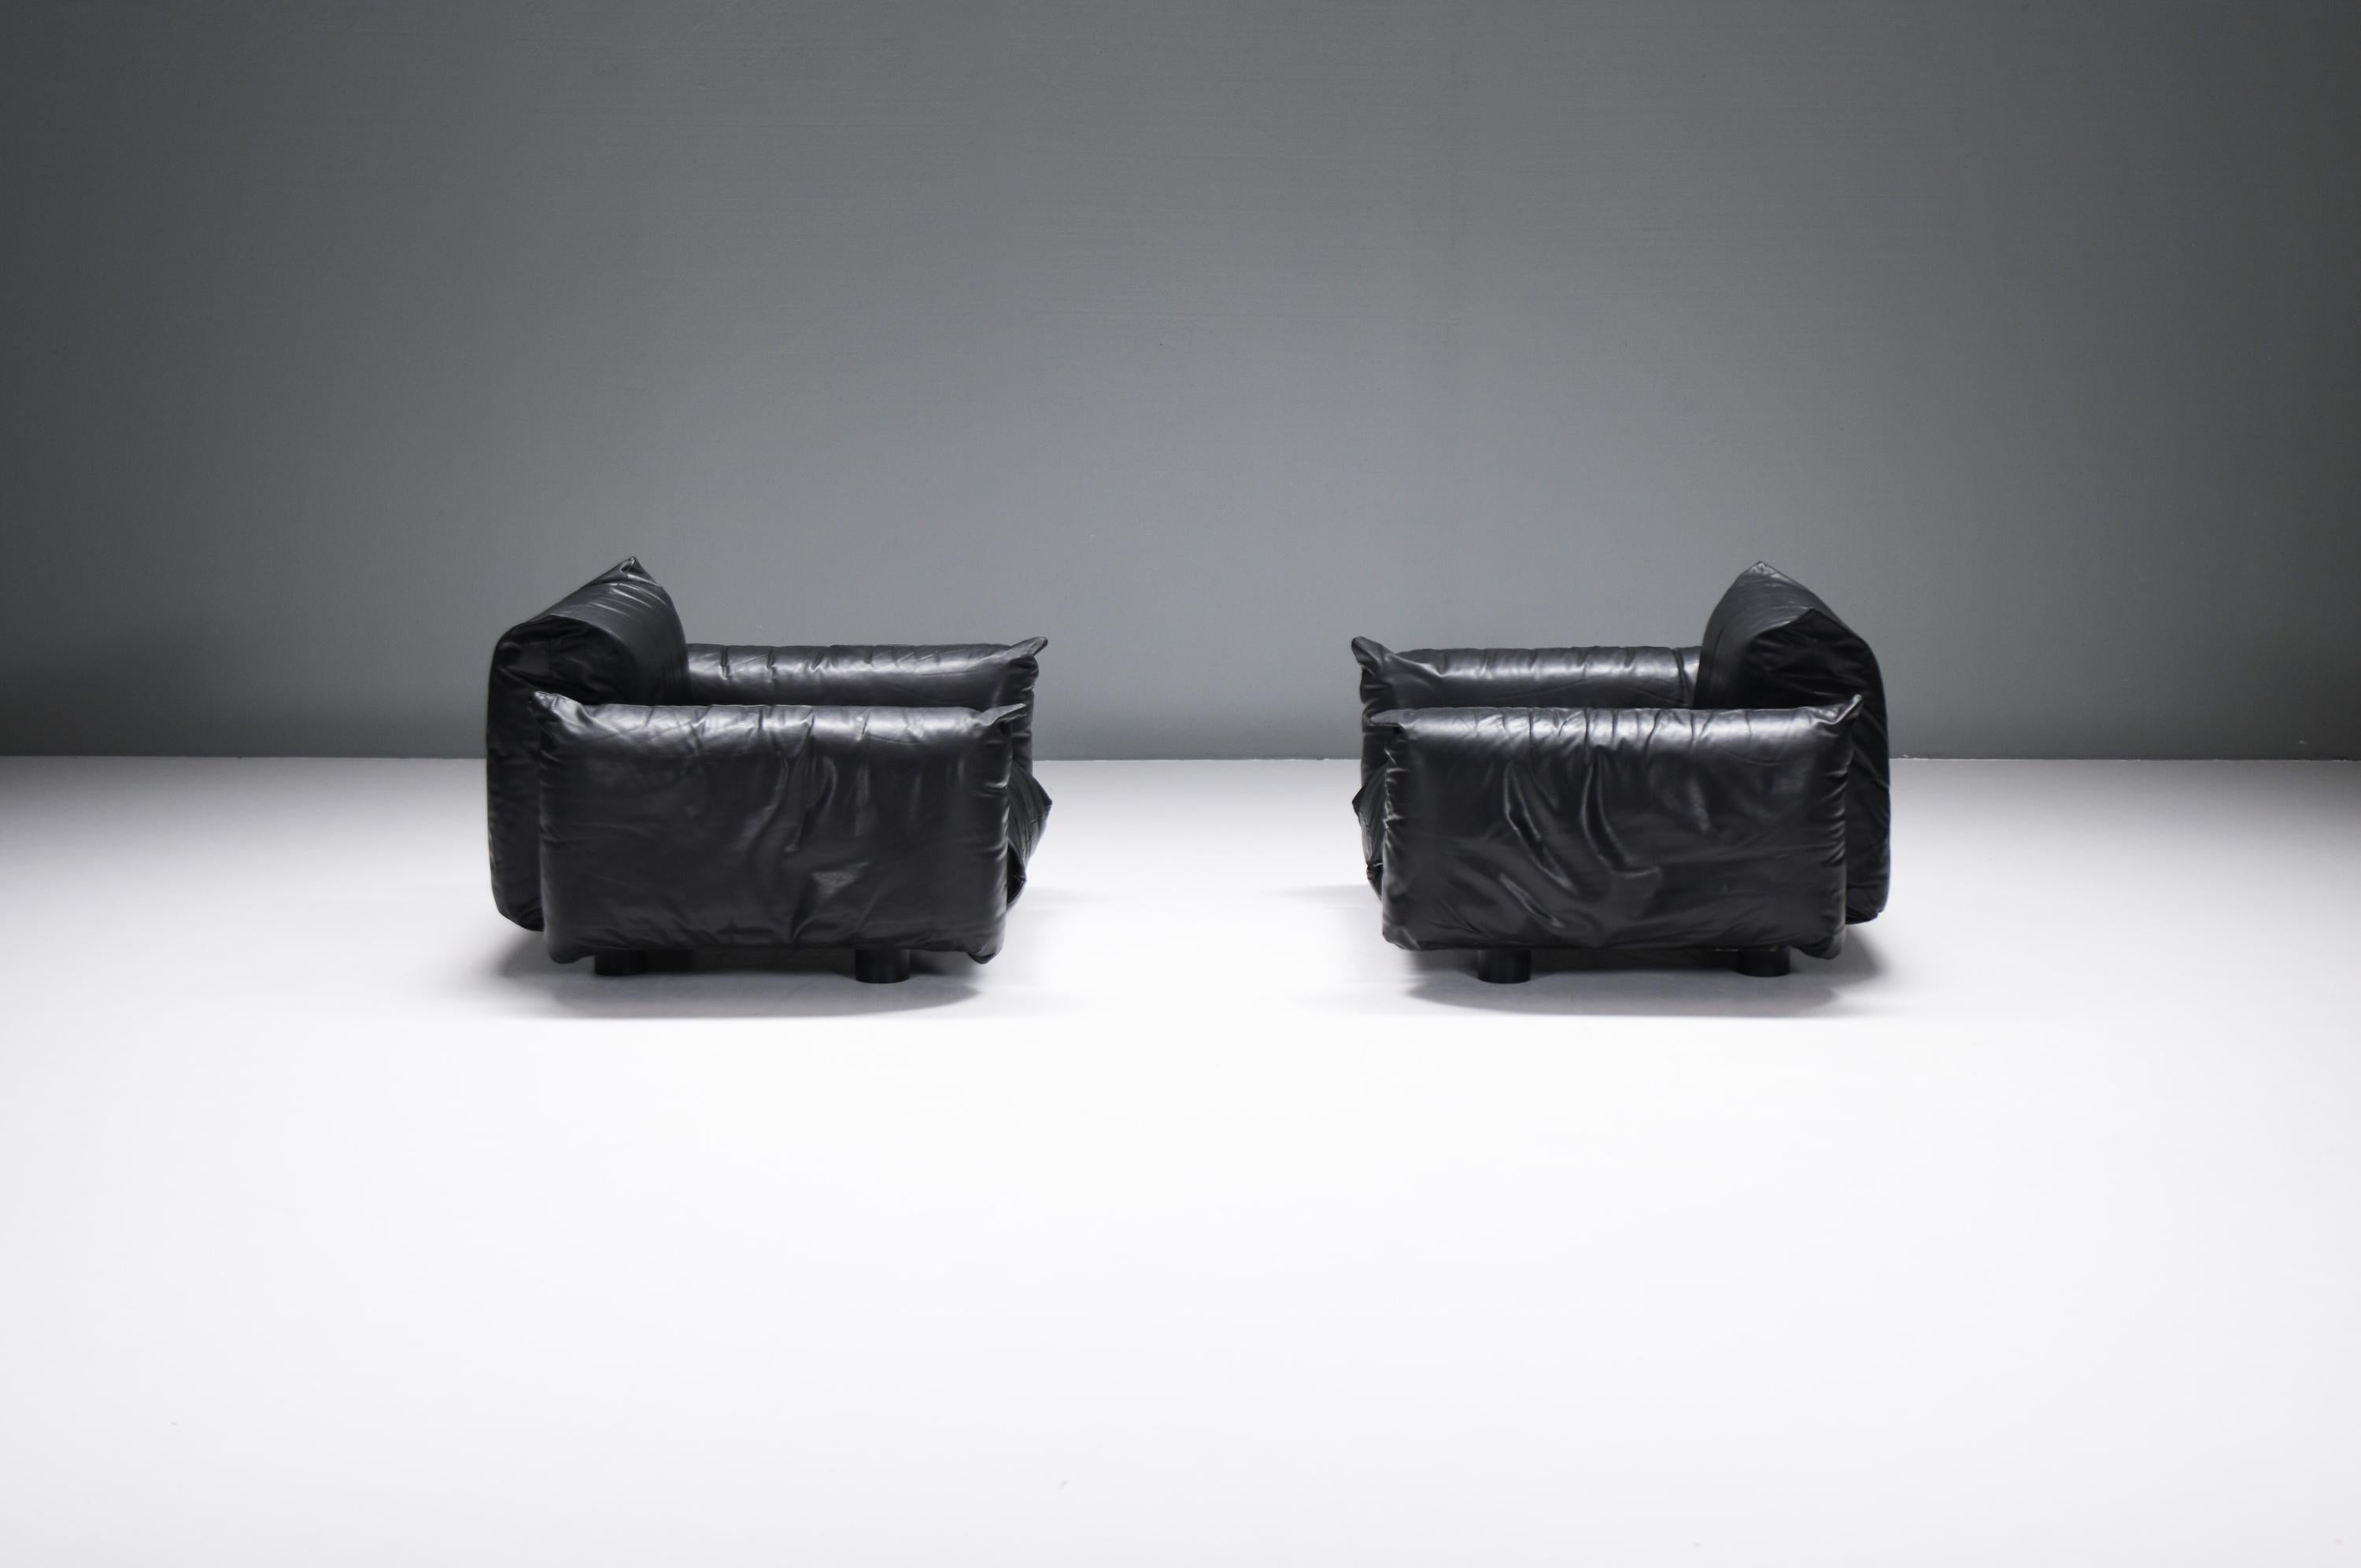 Leather Rare set of Marenco lounge chairs in leather by Mario Marenco for ARFLEX Italy